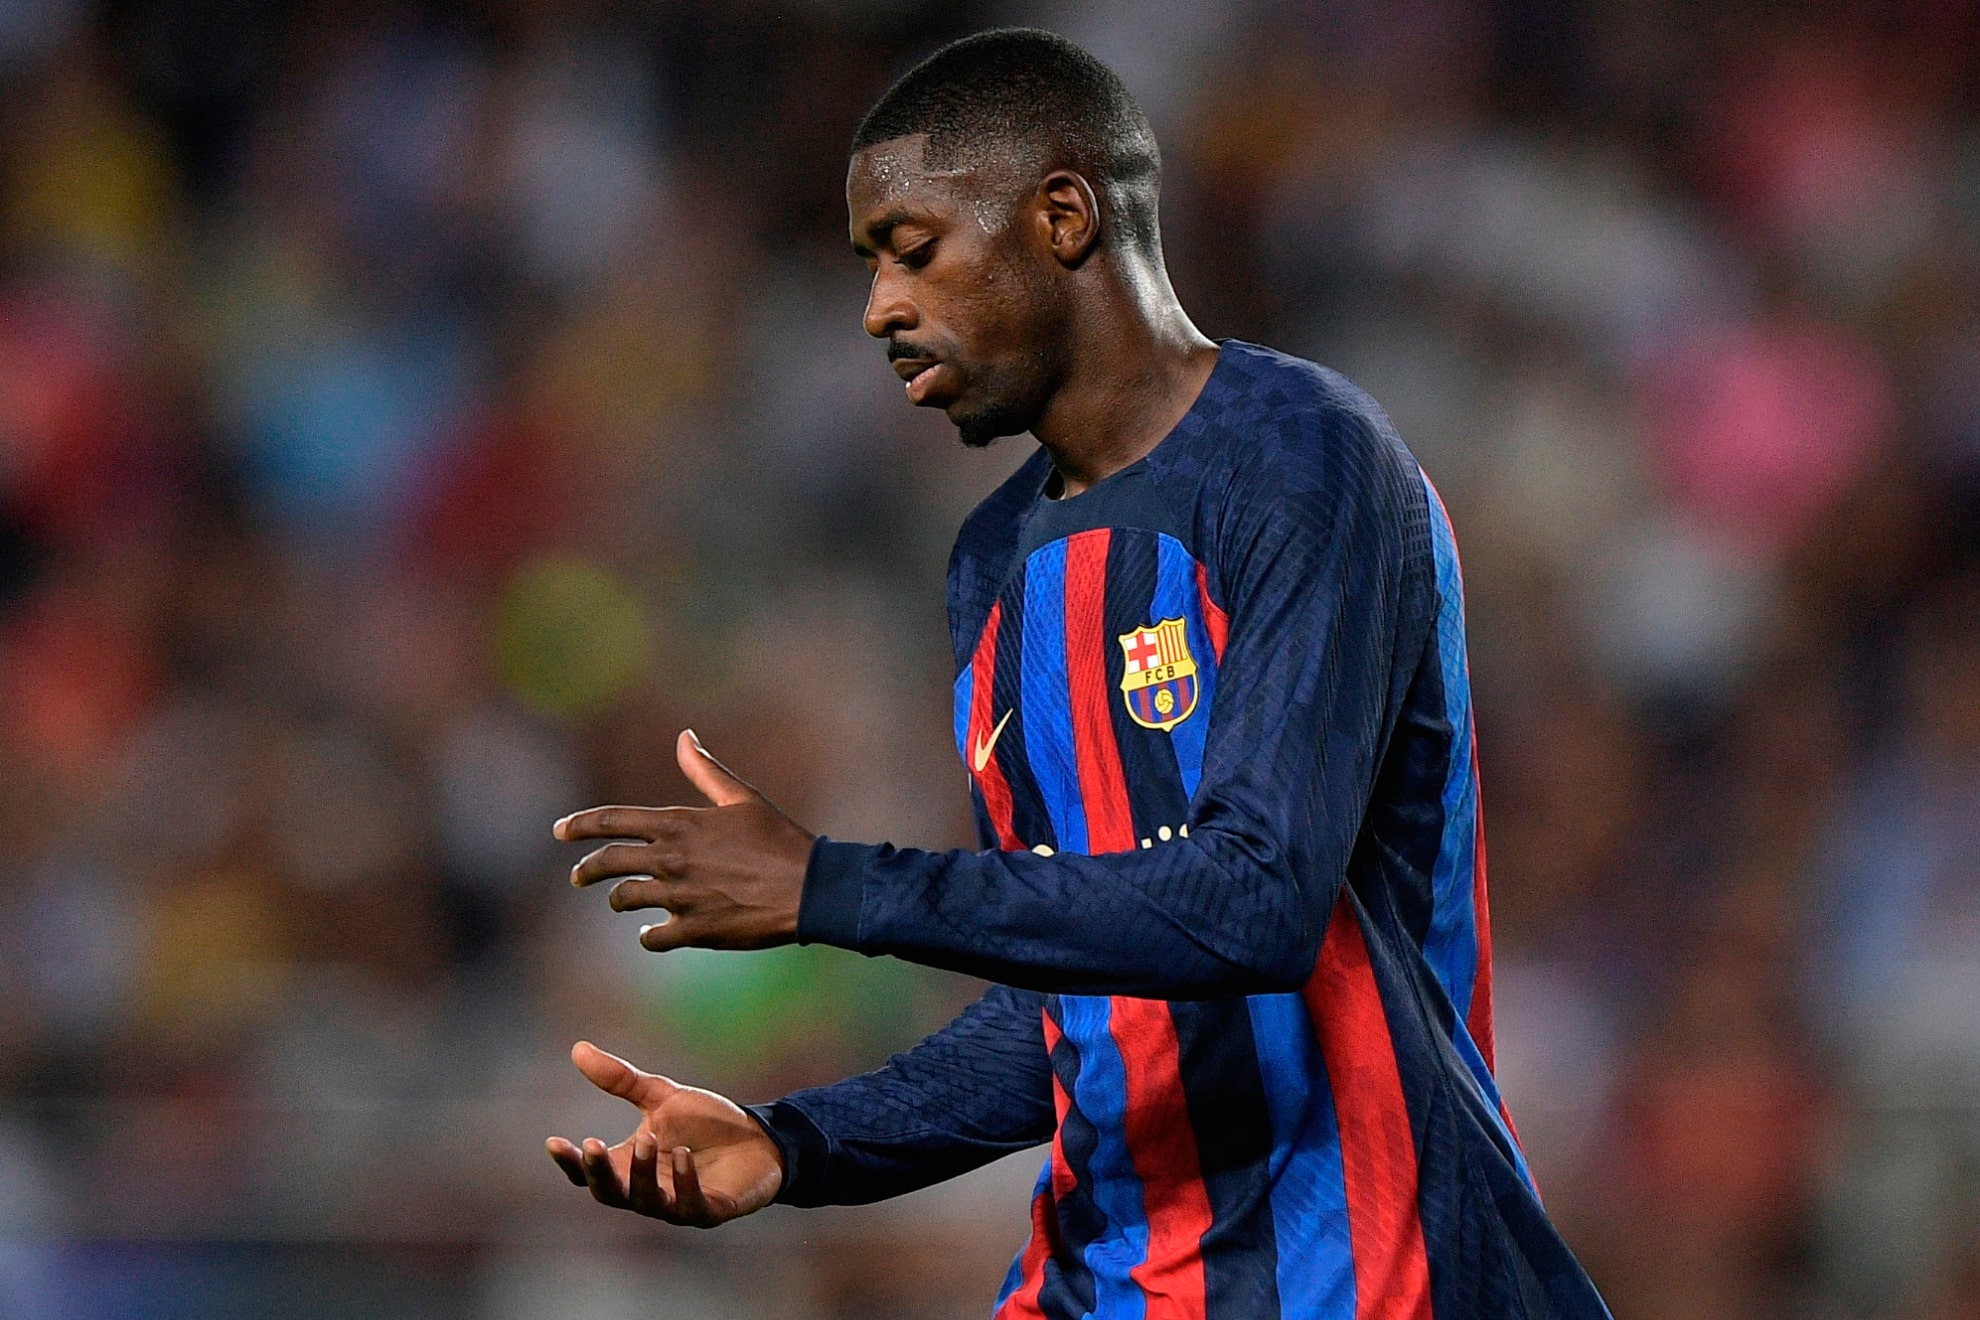  Ousmane Dembele is playing soccer for FC Barcelona, not PSG.